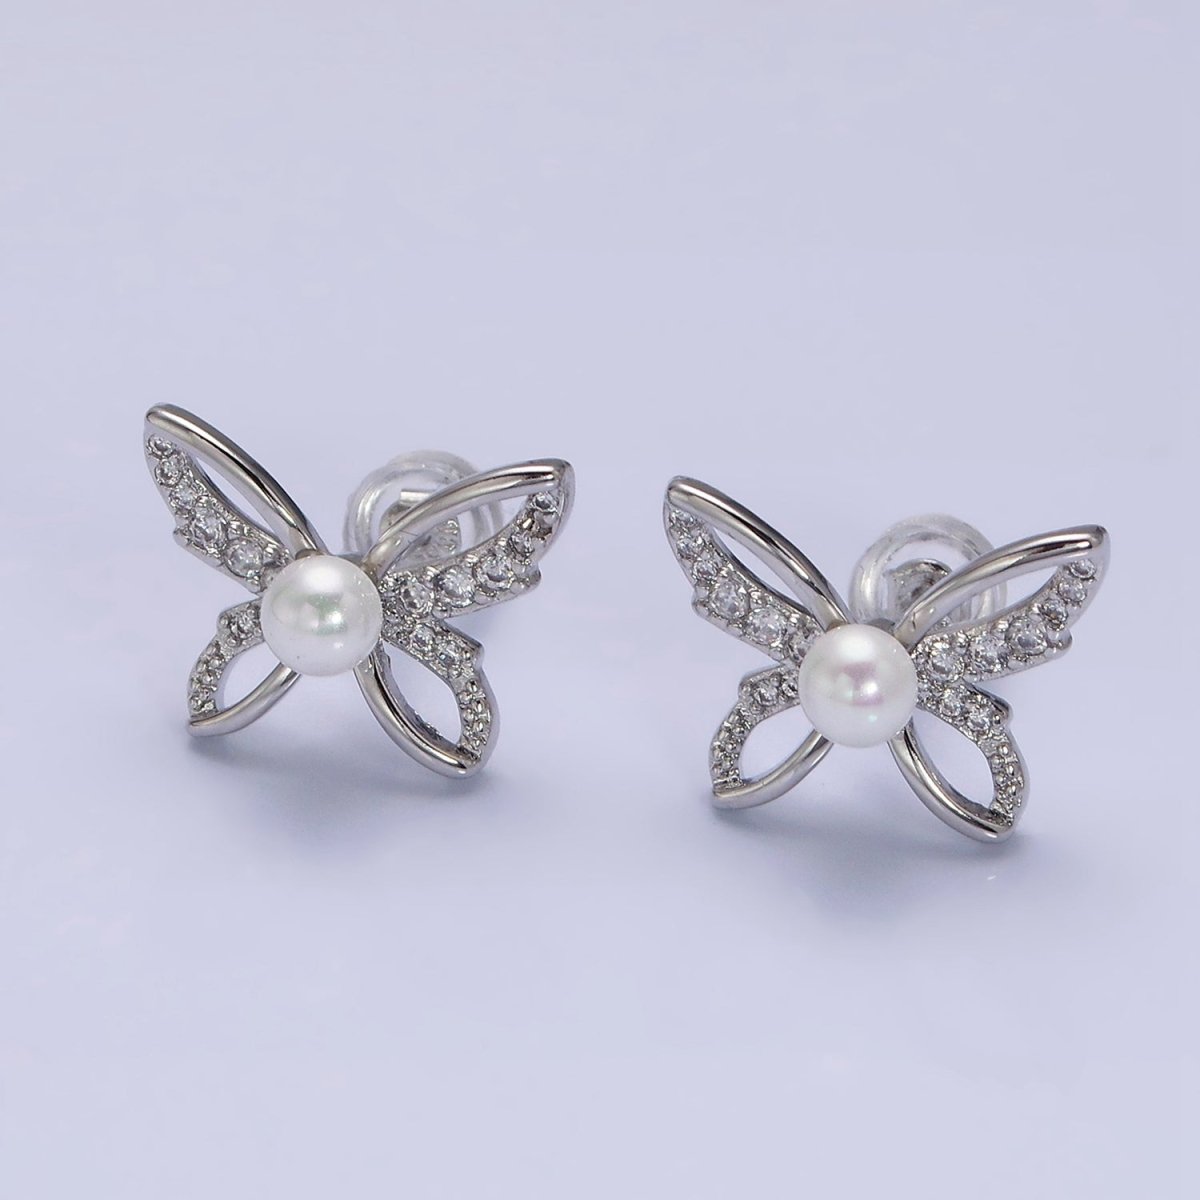 16K Gold Filled Micro Paved CZ Pearl Butterfly Mariposa Stud Earrings | AD1251 AD3495 - DLUXCA